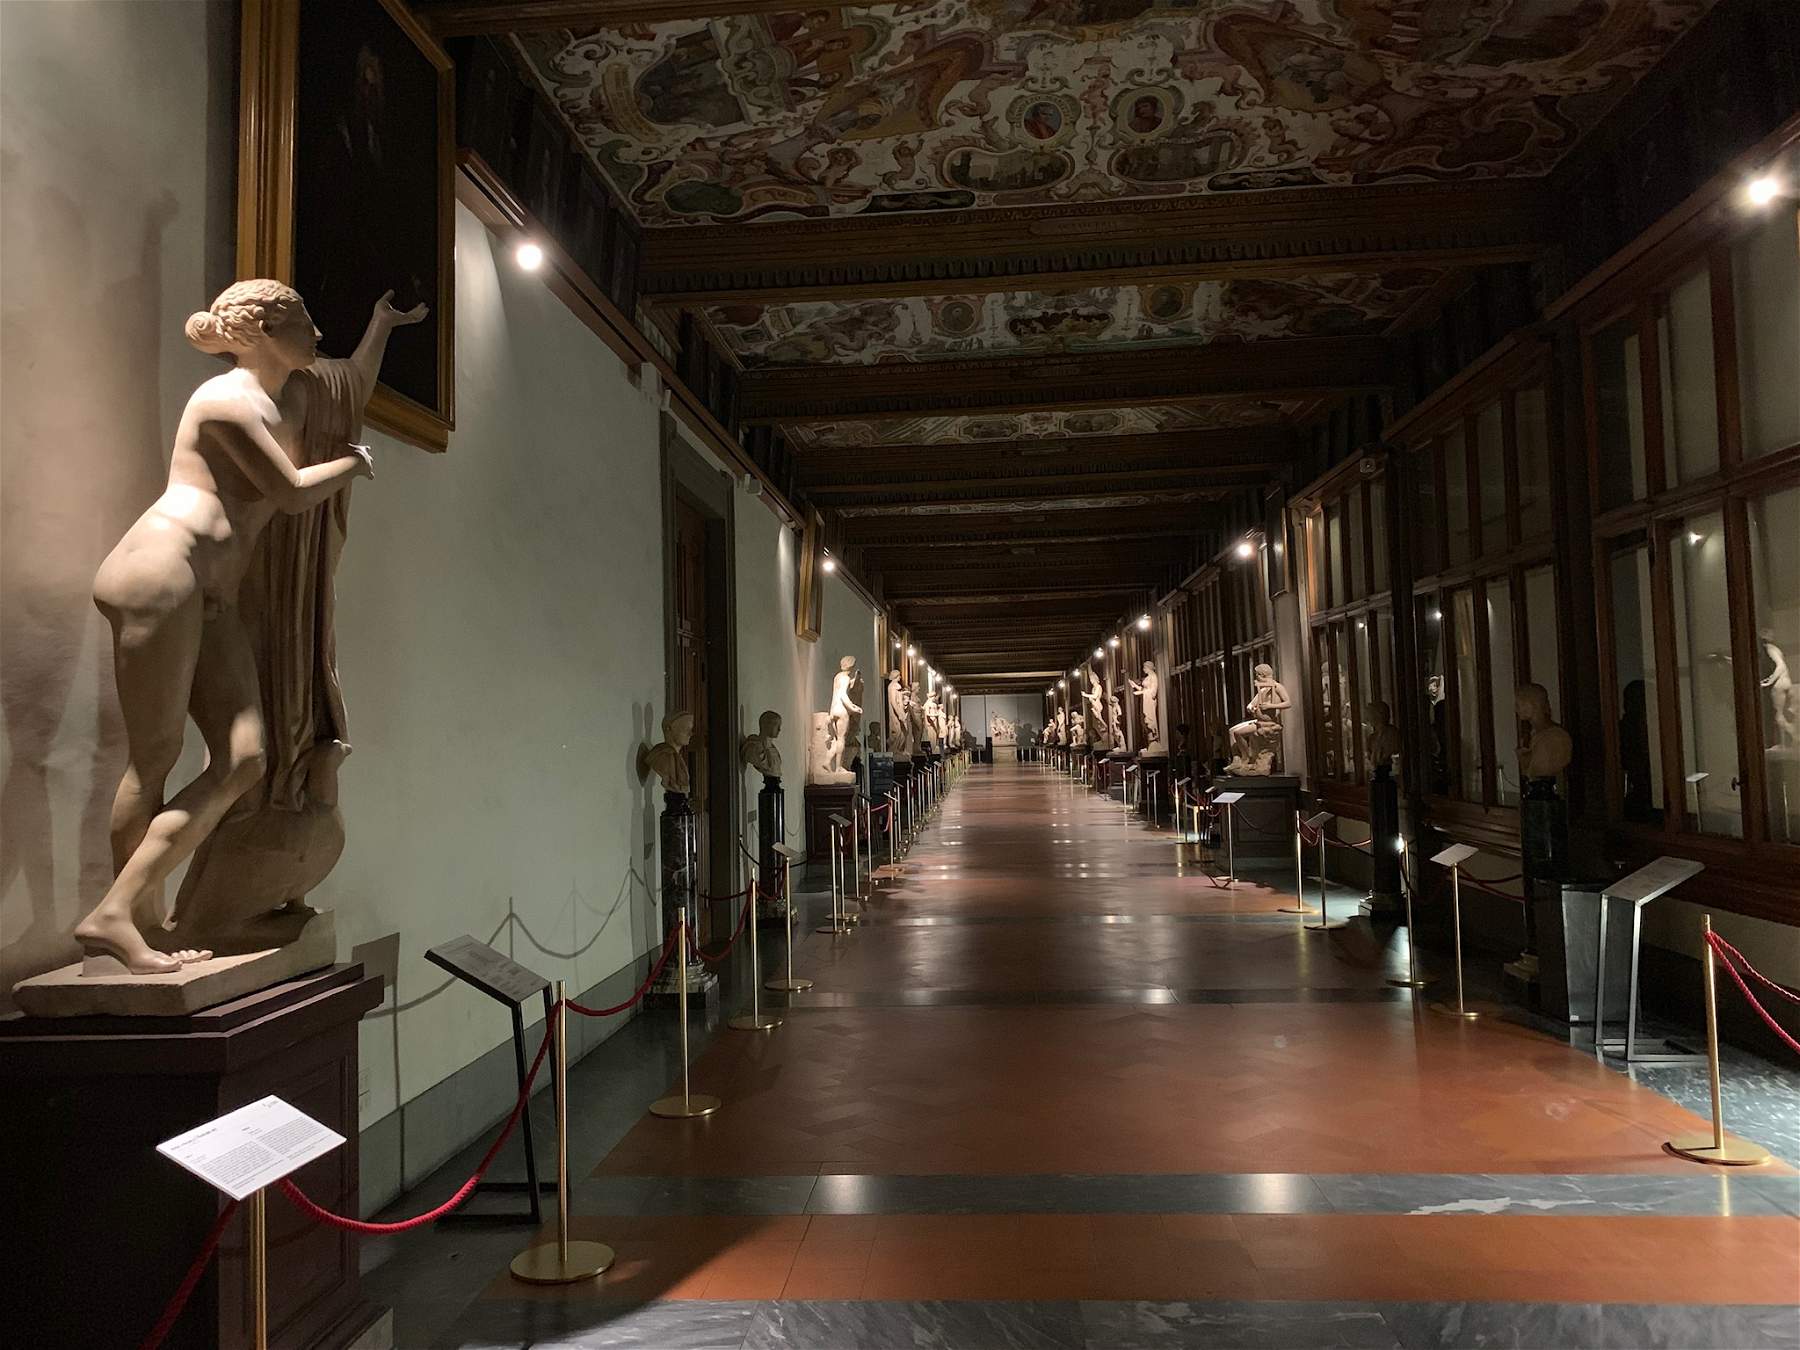 The Uffizi is booming with evening visits. A signal for museums to always open in the evening?